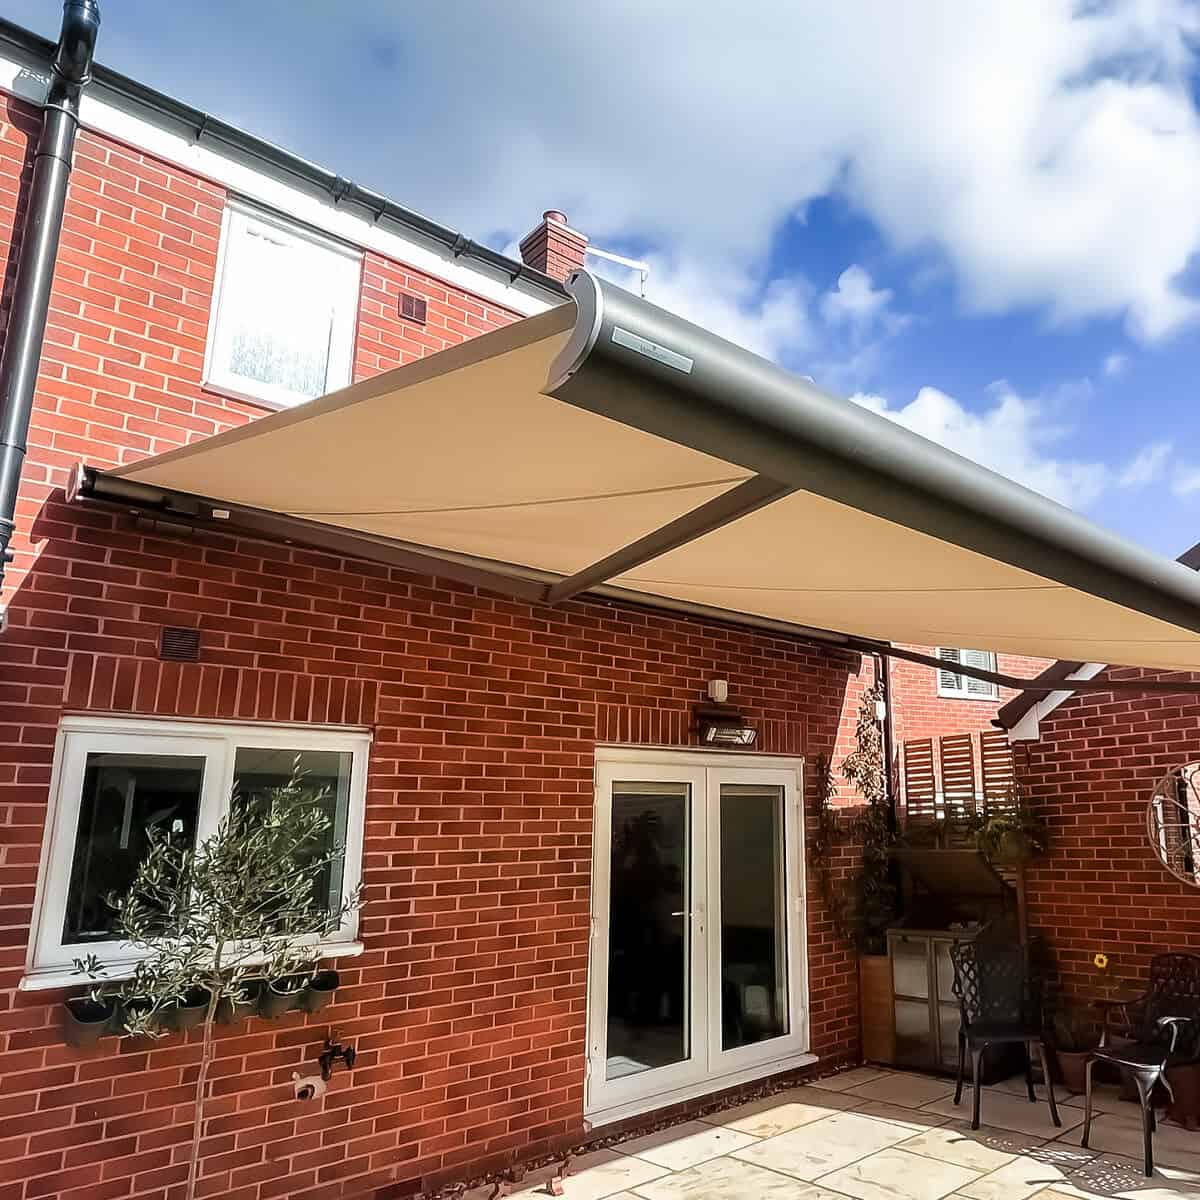 Retractable awning by Weinor